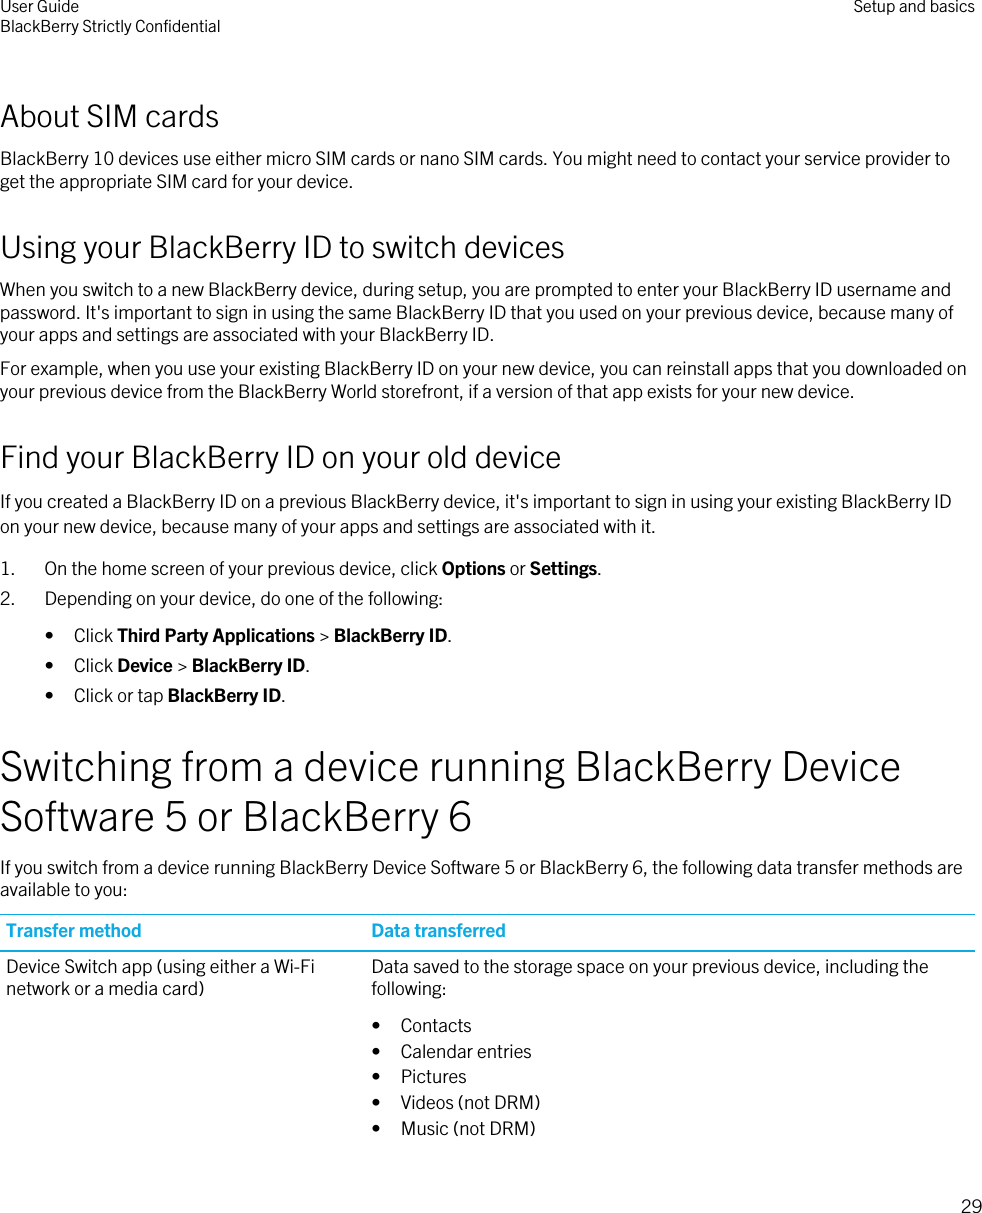 About SIM cardsBlackBerry 10 devices use either micro SIM cards or nano SIM cards. You might need to contact your service provider to get the appropriate SIM card for your device.Using your BlackBerry ID to switch devicesWhen you switch to a new BlackBerry device, during setup, you are prompted to enter your BlackBerry ID username and password. It&apos;s important to sign in using the same BlackBerry ID that you used on your previous device, because many of your apps and settings are associated with your BlackBerry ID.For example, when you use your existing BlackBerry ID on your new device, you can reinstall apps that you downloaded on your previous device from the BlackBerry World storefront, if a version of that app exists for your new device.Find your BlackBerry ID on your old deviceIf you created a BlackBerry ID on a previous BlackBerry device, it&apos;s important to sign in using your existing BlackBerry ID on your new device, because many of your apps and settings are associated with it.1. On the home screen of your previous device, click Options or Settings.2. Depending on your device, do one of the following:• Click Third Party Applications &gt; BlackBerry ID.• Click Device &gt; BlackBerry ID.• Click or tap BlackBerry ID.Switching from a device running BlackBerry Device Software 5 or BlackBerry 6If you switch from a device running BlackBerry Device Software 5 or BlackBerry 6, the following data transfer methods are available to you:Transfer method Data transferredDevice Switch app (using either a Wi-Fi network or a media card) Data saved to the storage space on your previous device, including the following:• Contacts• Calendar entries• Pictures• Videos (not DRM)• Music (not DRM)User GuideBlackBerry Strictly Confidential Setup and basics29